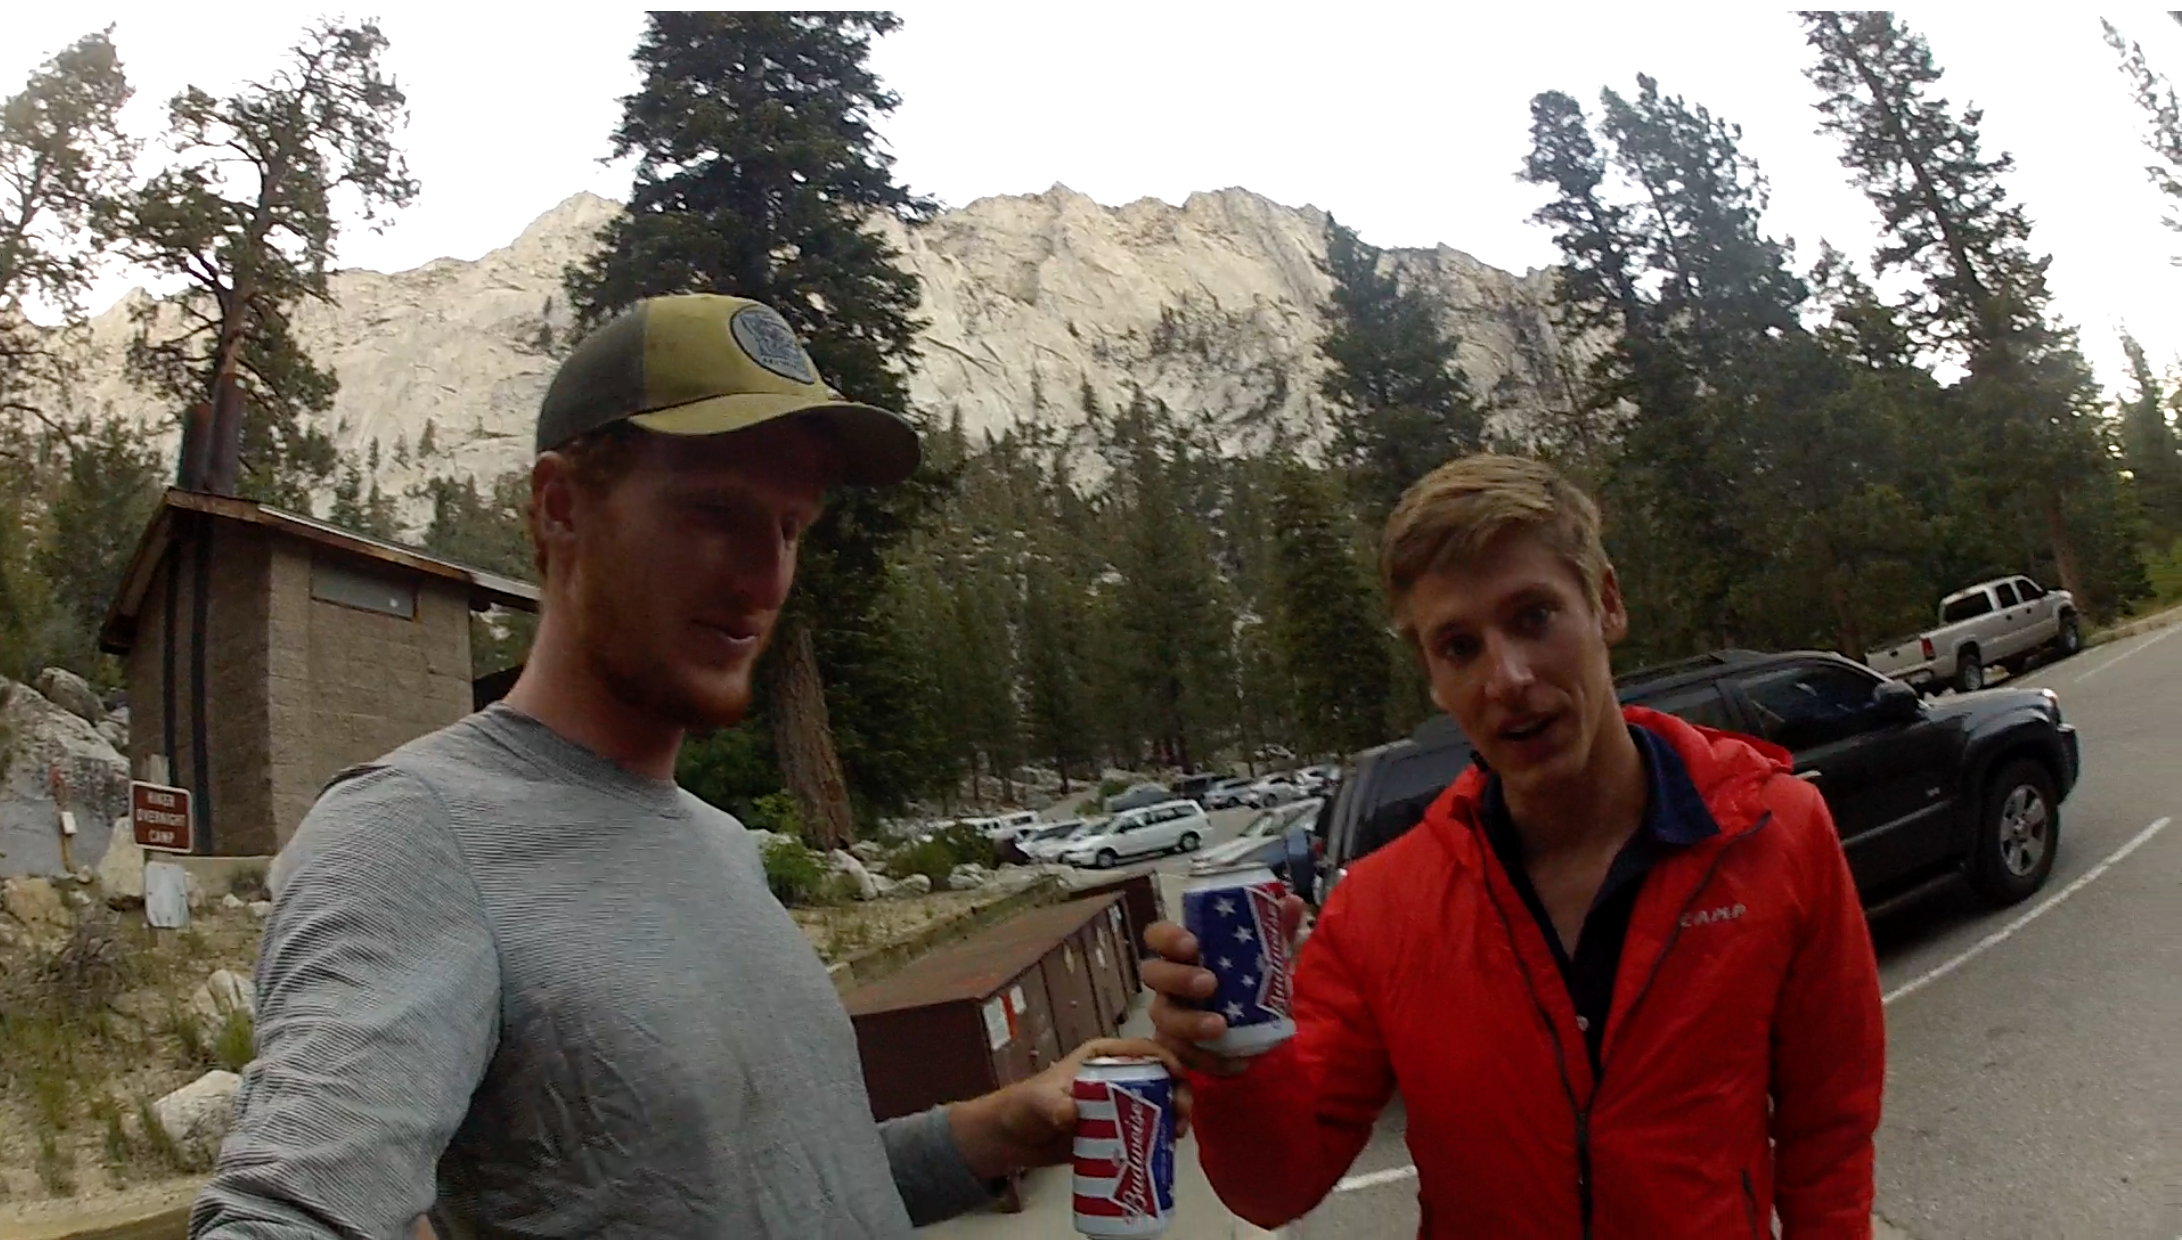 enjoying a cold one in the parking lot after a successful adventure into the High Sierras.